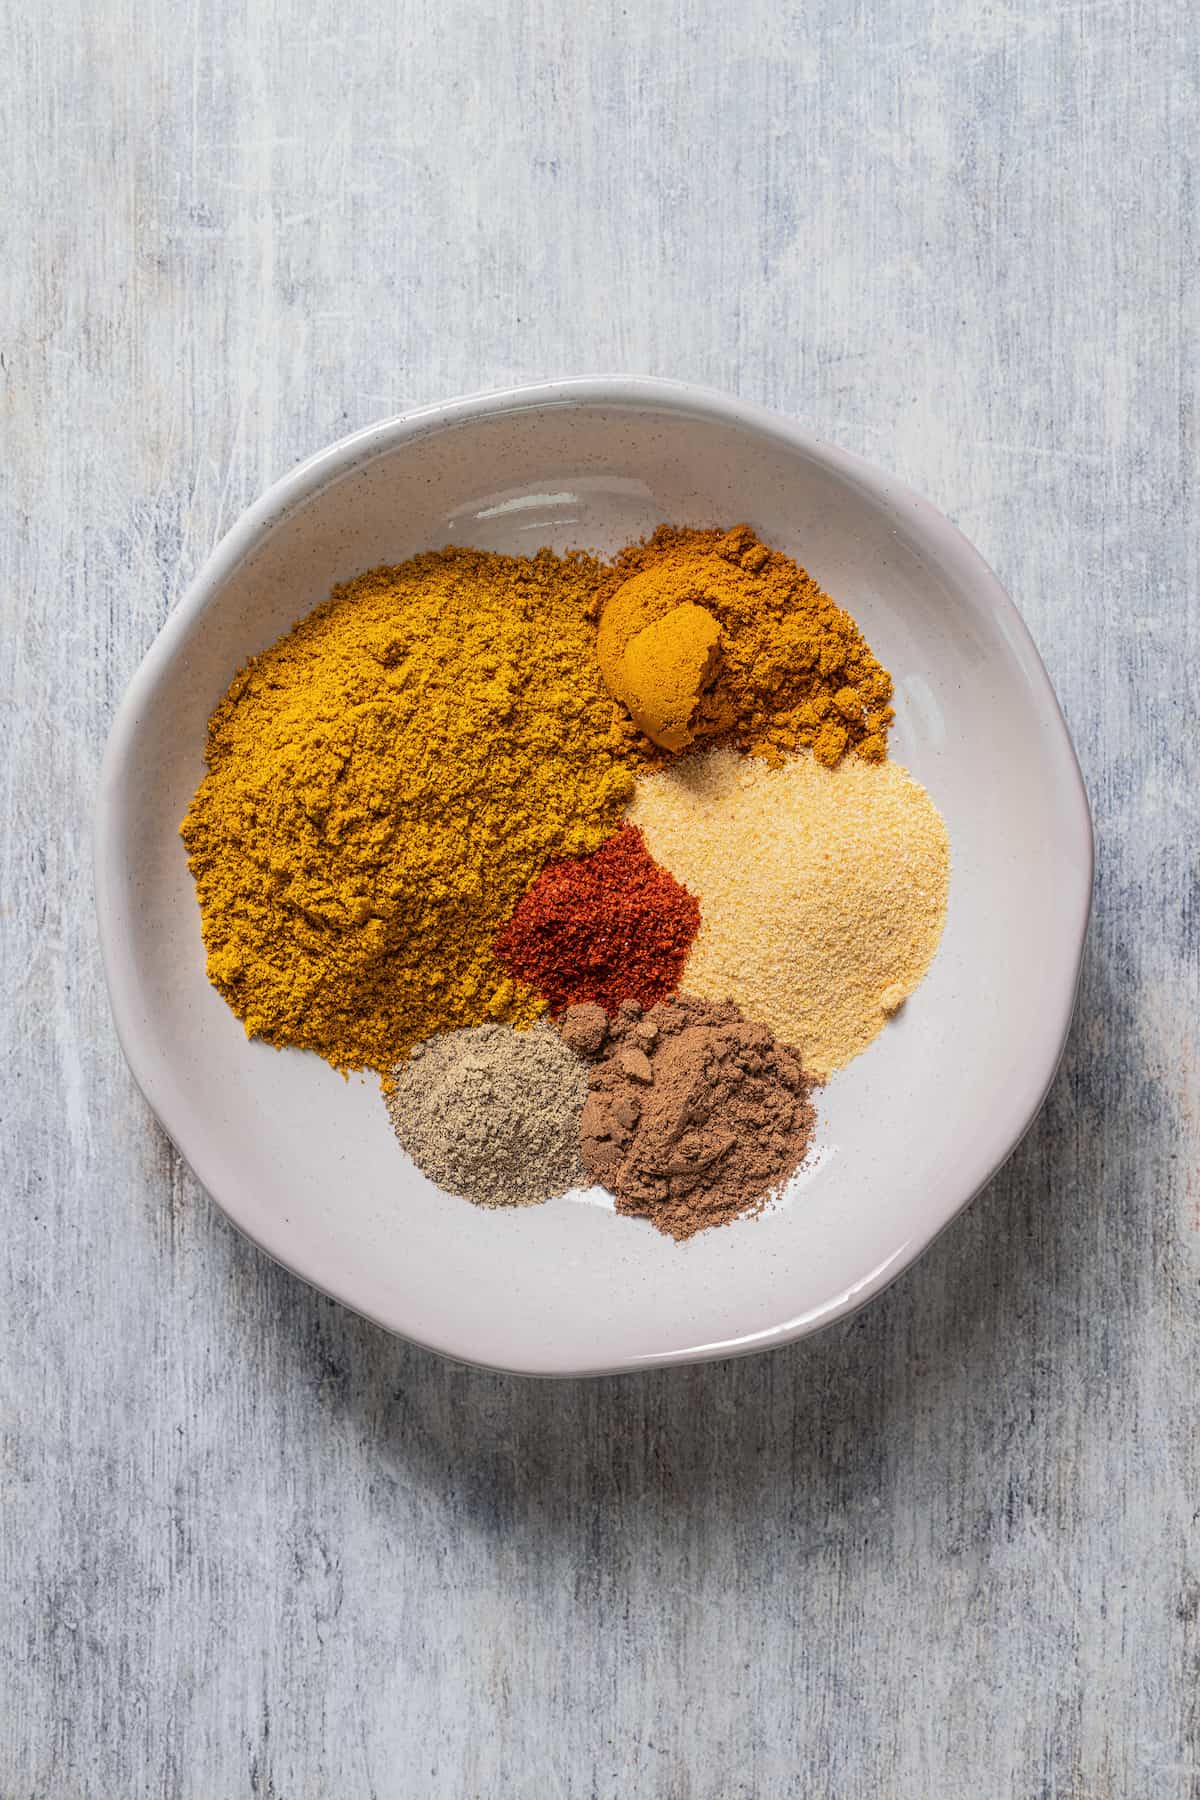 Spices for Jamaican curry in a bowl.